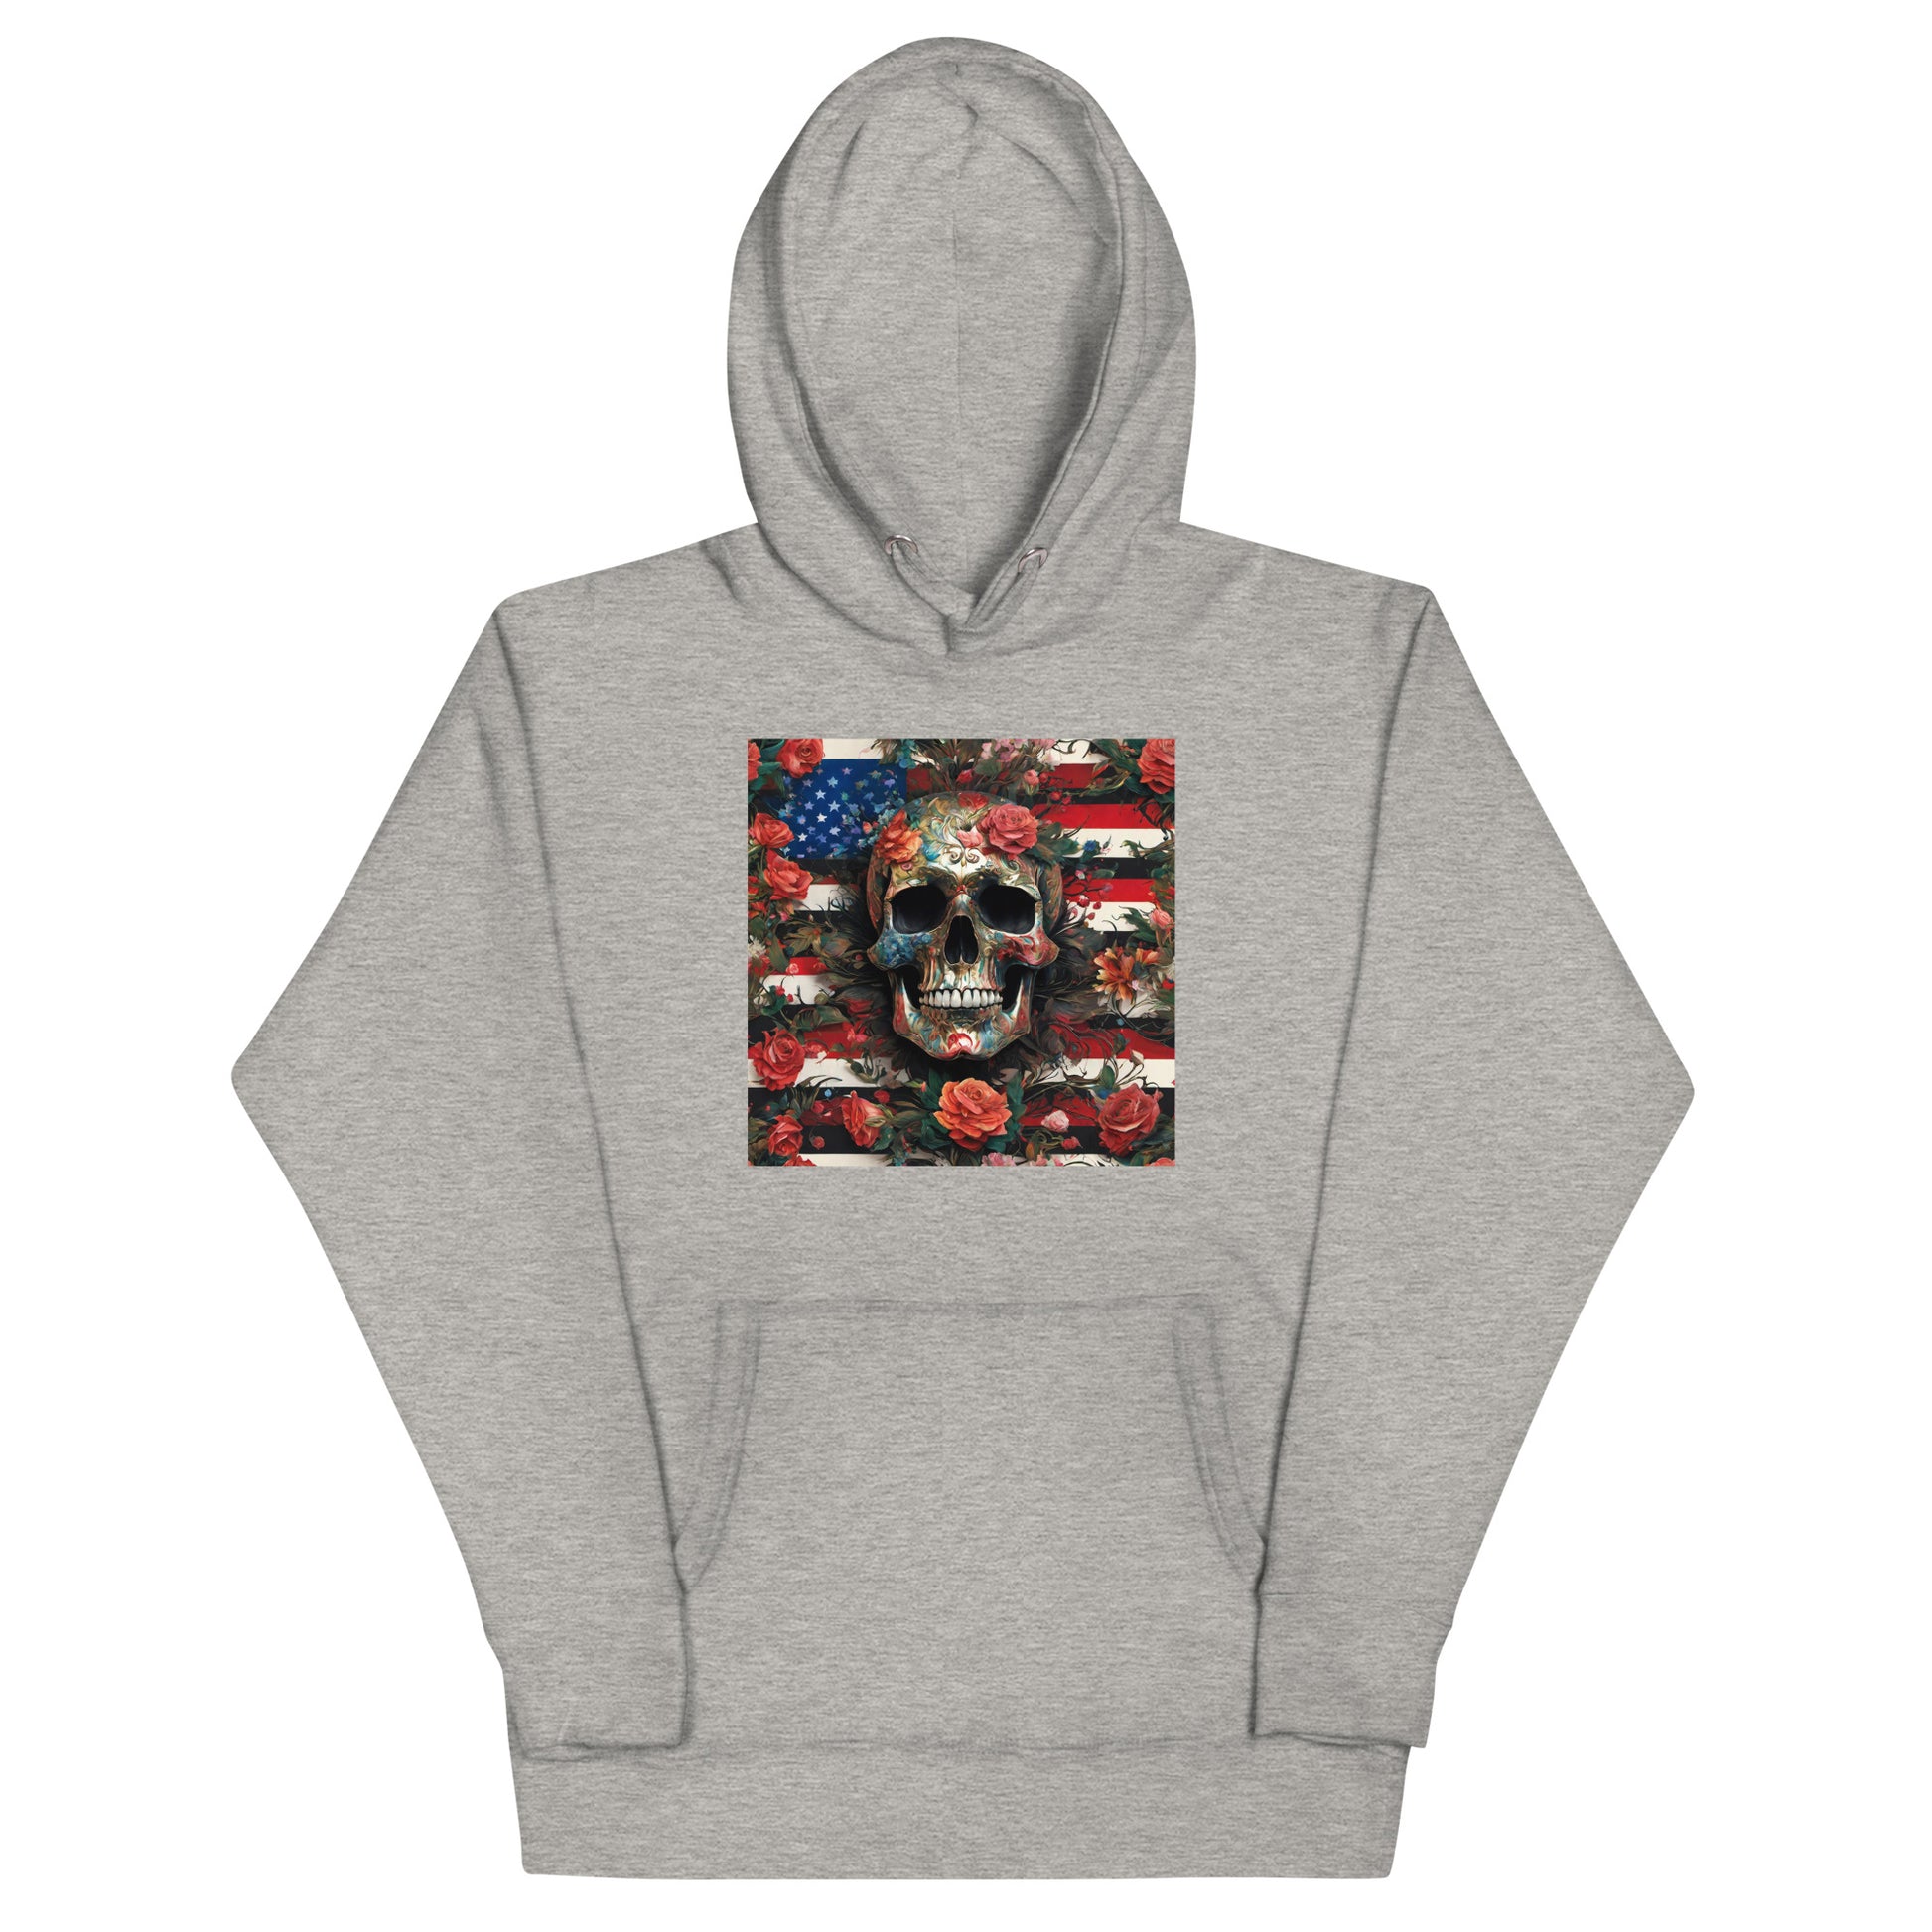 Skull, Roses, and Flag Graphic Hoodie Carbon Grey